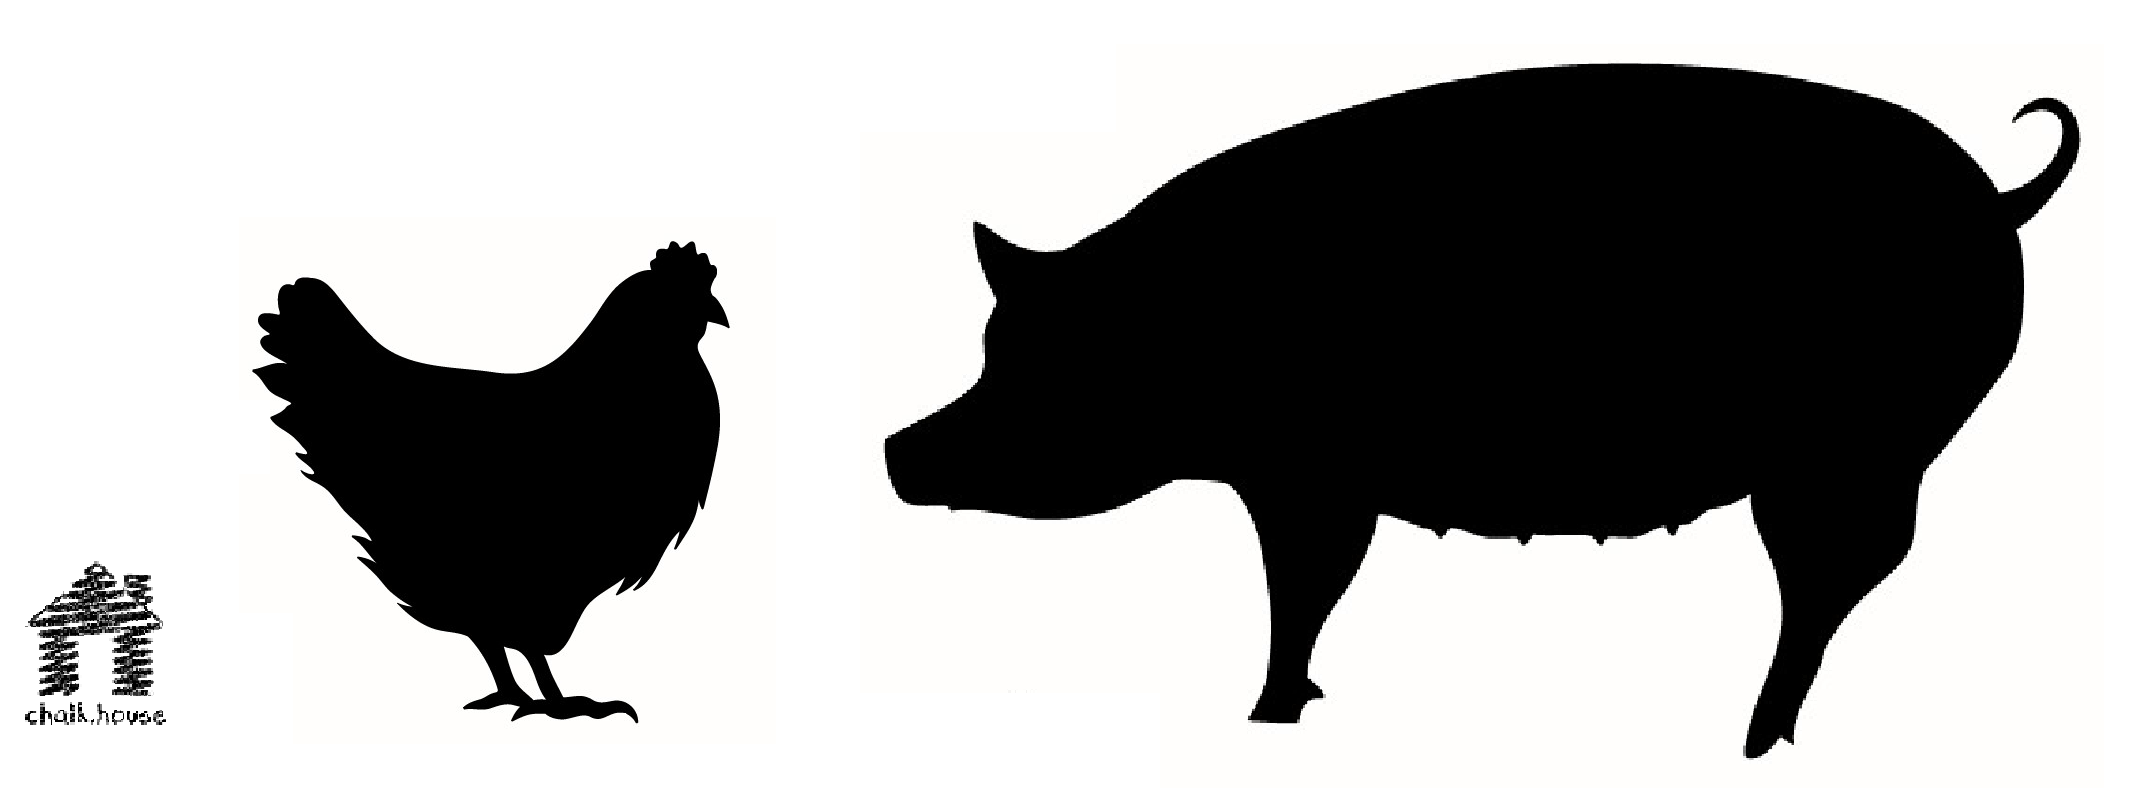 Chickens clipart pig.